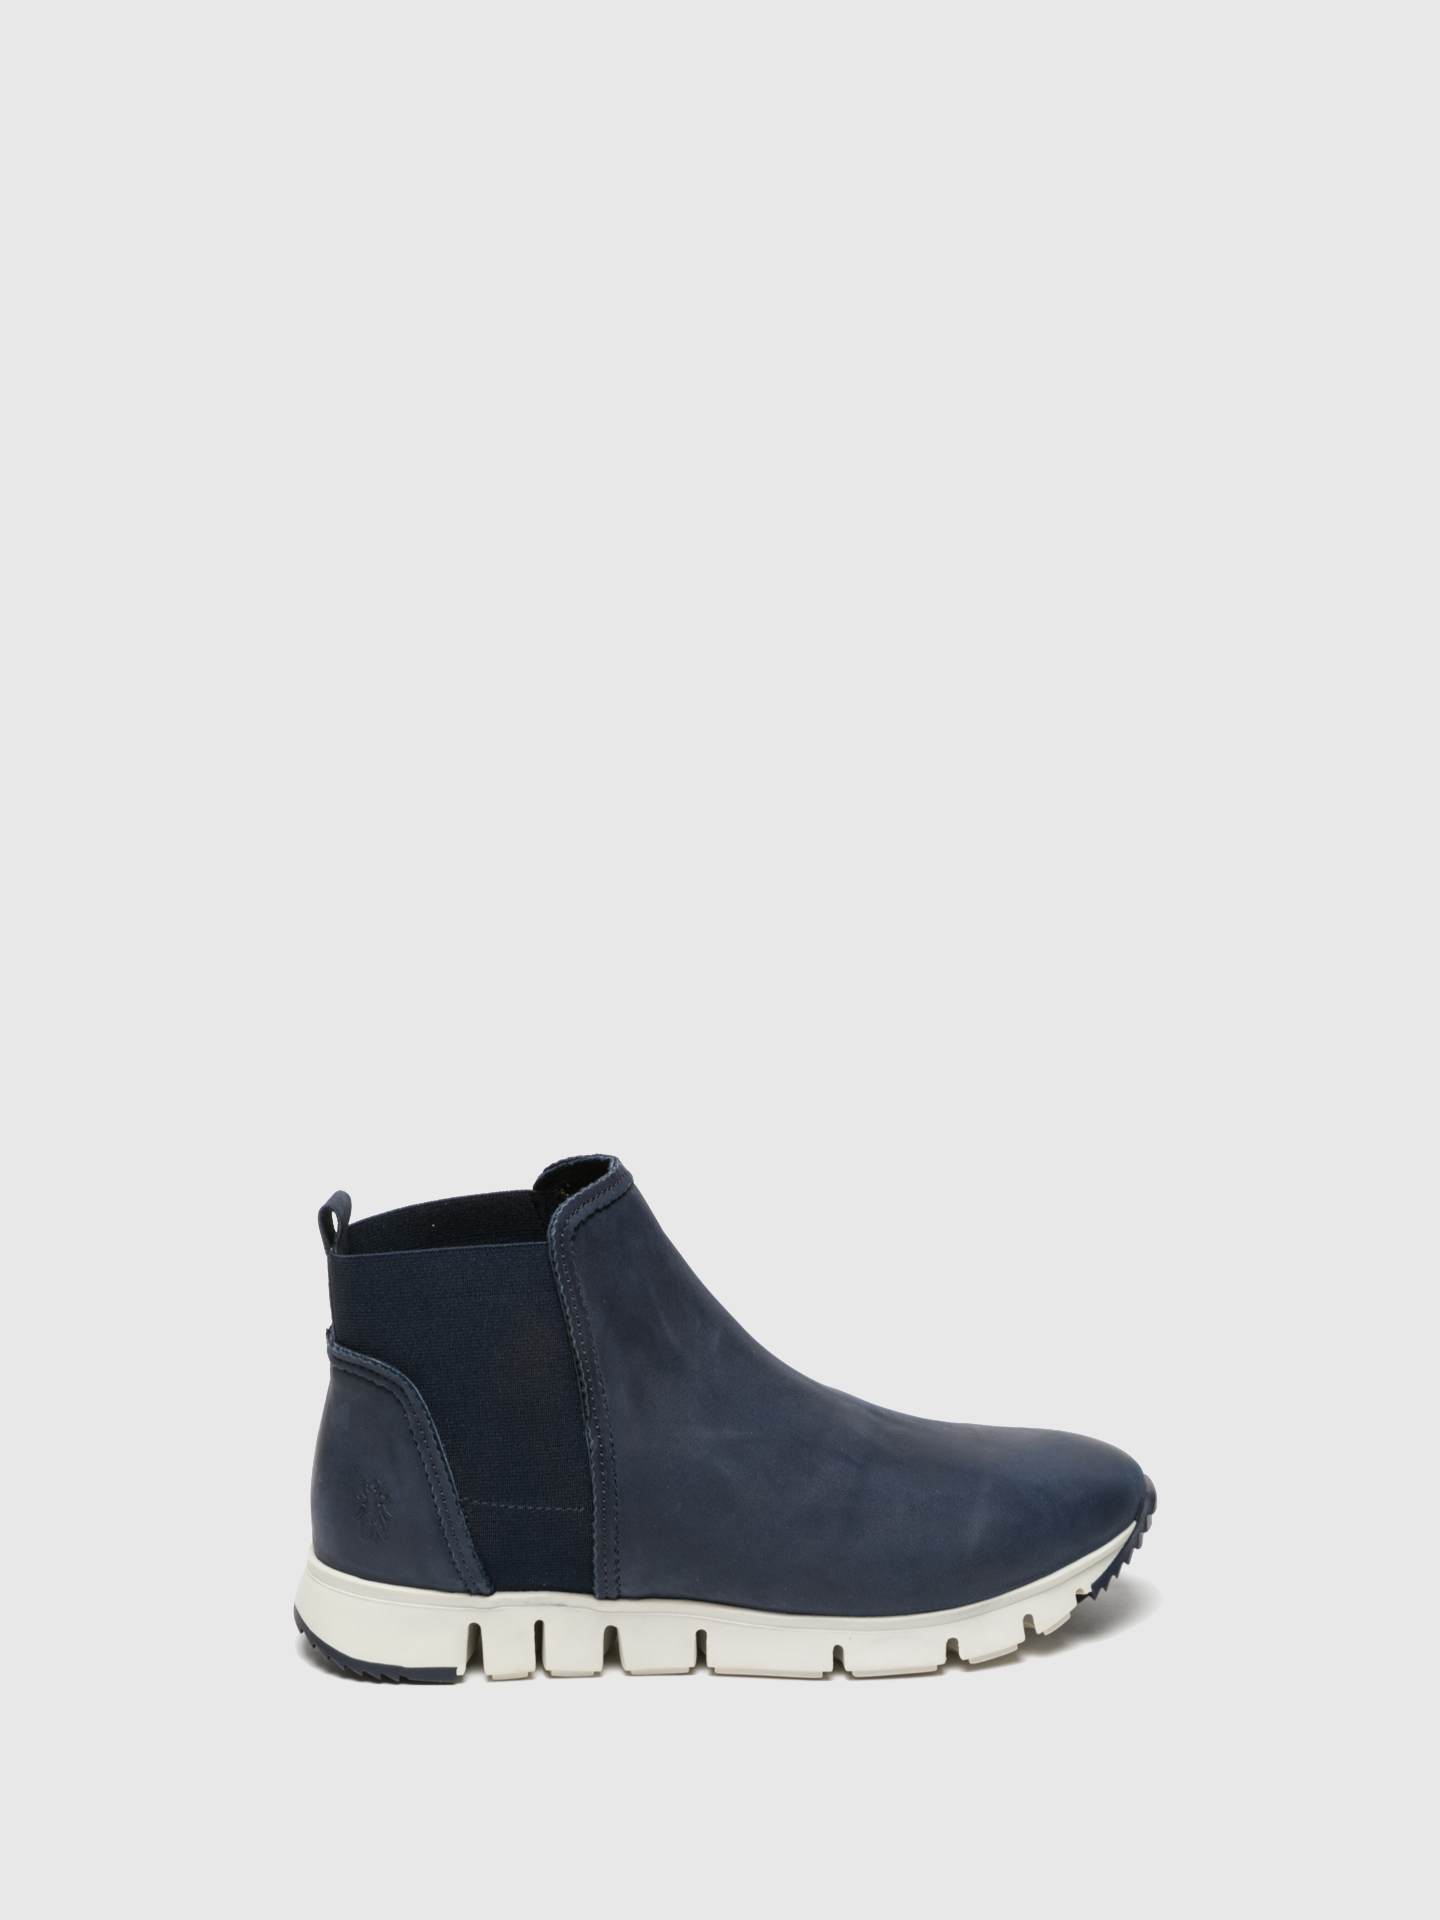 Fly London Navy Elasticated Ankle Boots